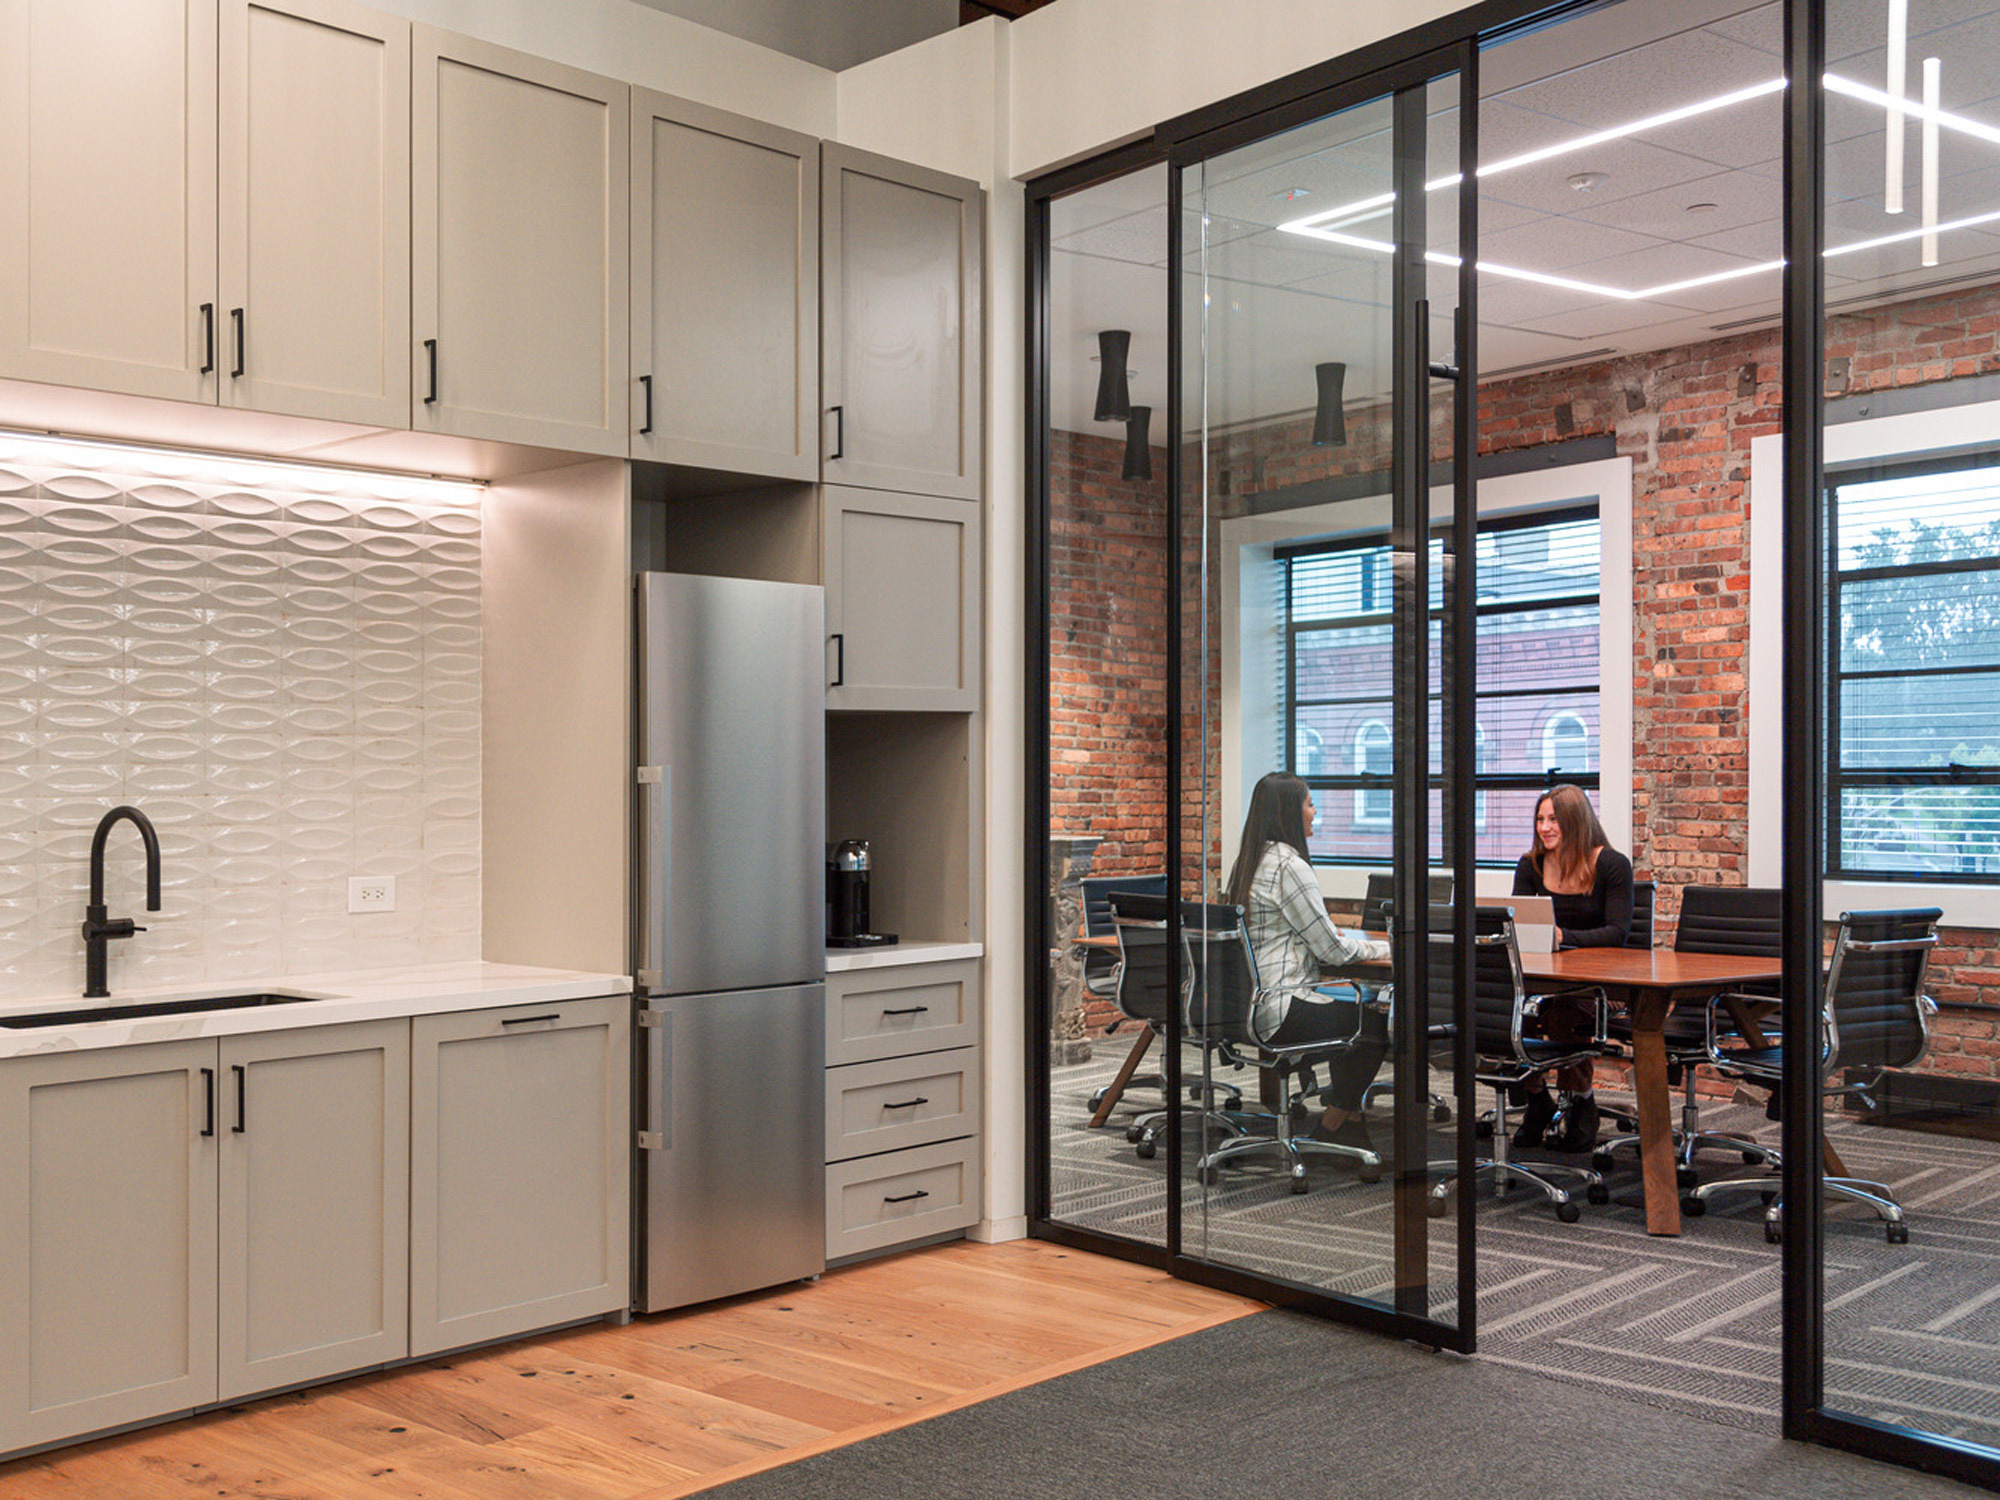 Modern office kitchenette with sleek gray cabinetry and textured white backsplash juxtaposed with warm wood flooring. Glass partition reveals a collaborative workspace with two individuals engaged in conversation. Brick walls add rustic charm, balancing the industrial and contemporary design elements.